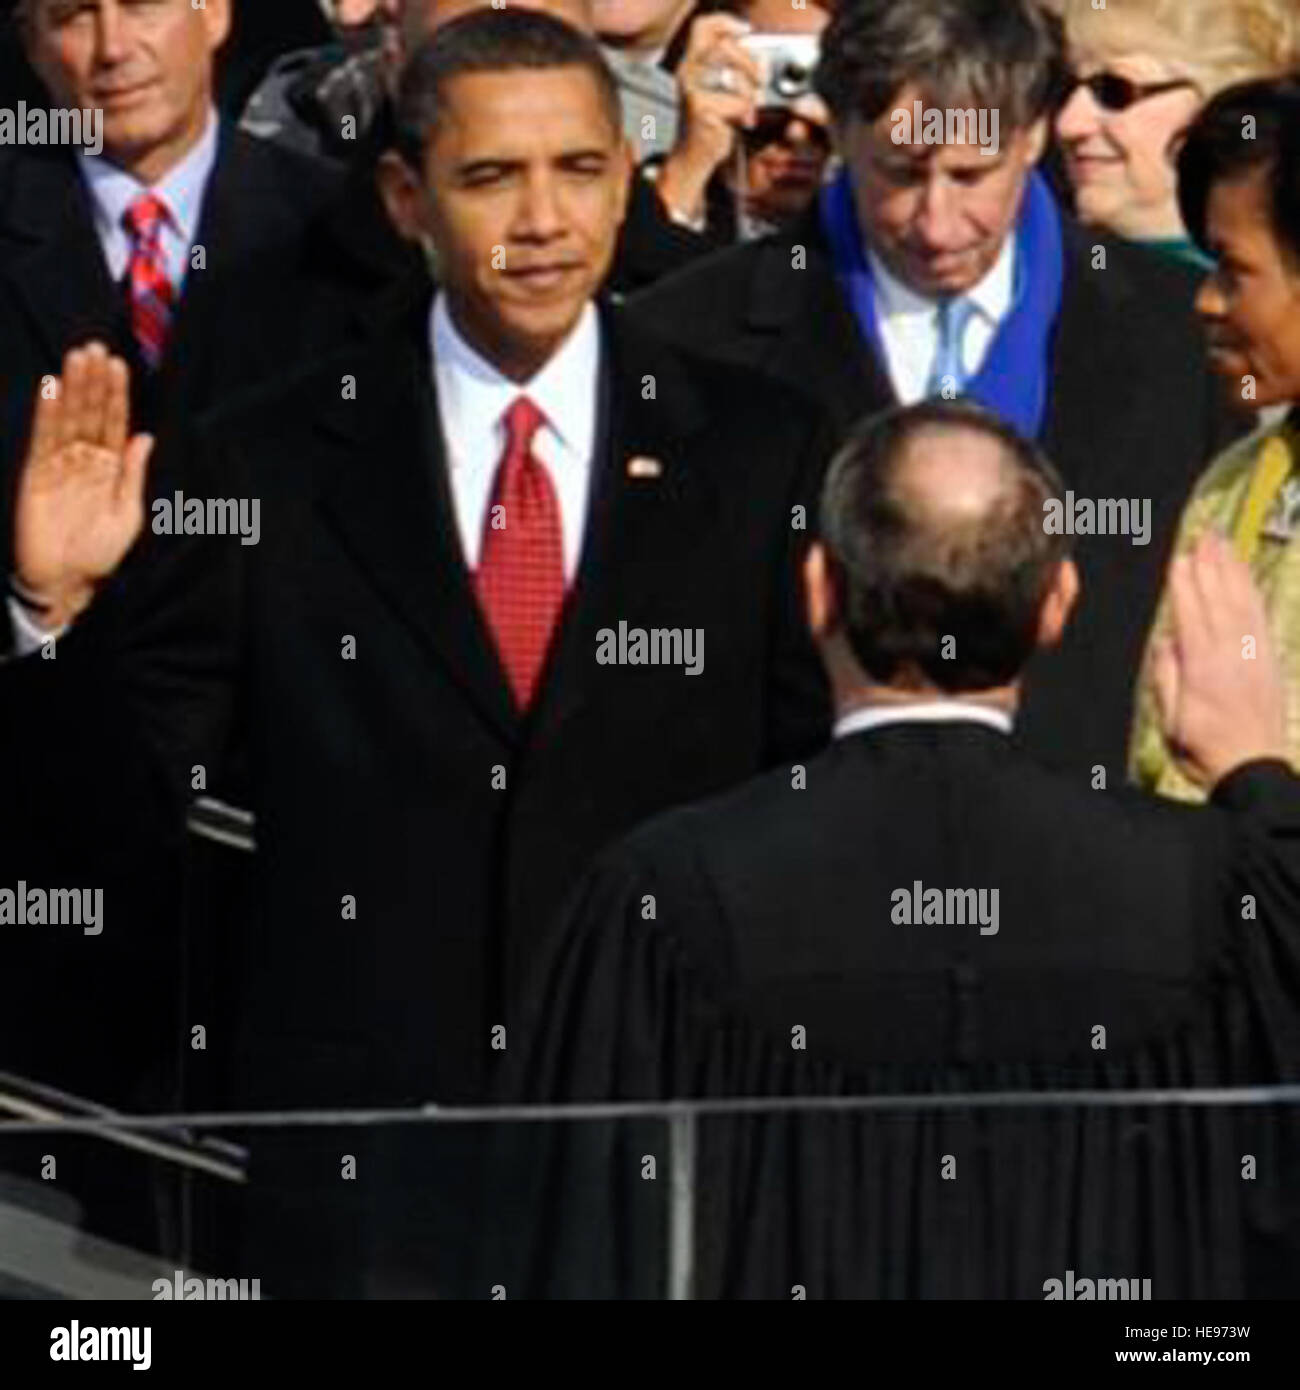 Barack Hussein Obama takes the oath of office from U.S. Chief Justice John G. Roberts Jr. in Washington, D.C., Jan. 20, 2009, becoming the 44th president of the United States.  More than 5,000 men and women in uniform are providing military ceremonial support to the presidential inauguration, a tradition dating back to George Washington's 1789 inauguration.   Master Sgt. Cecilio Ricardo, U.S. Air Force Stock Photo